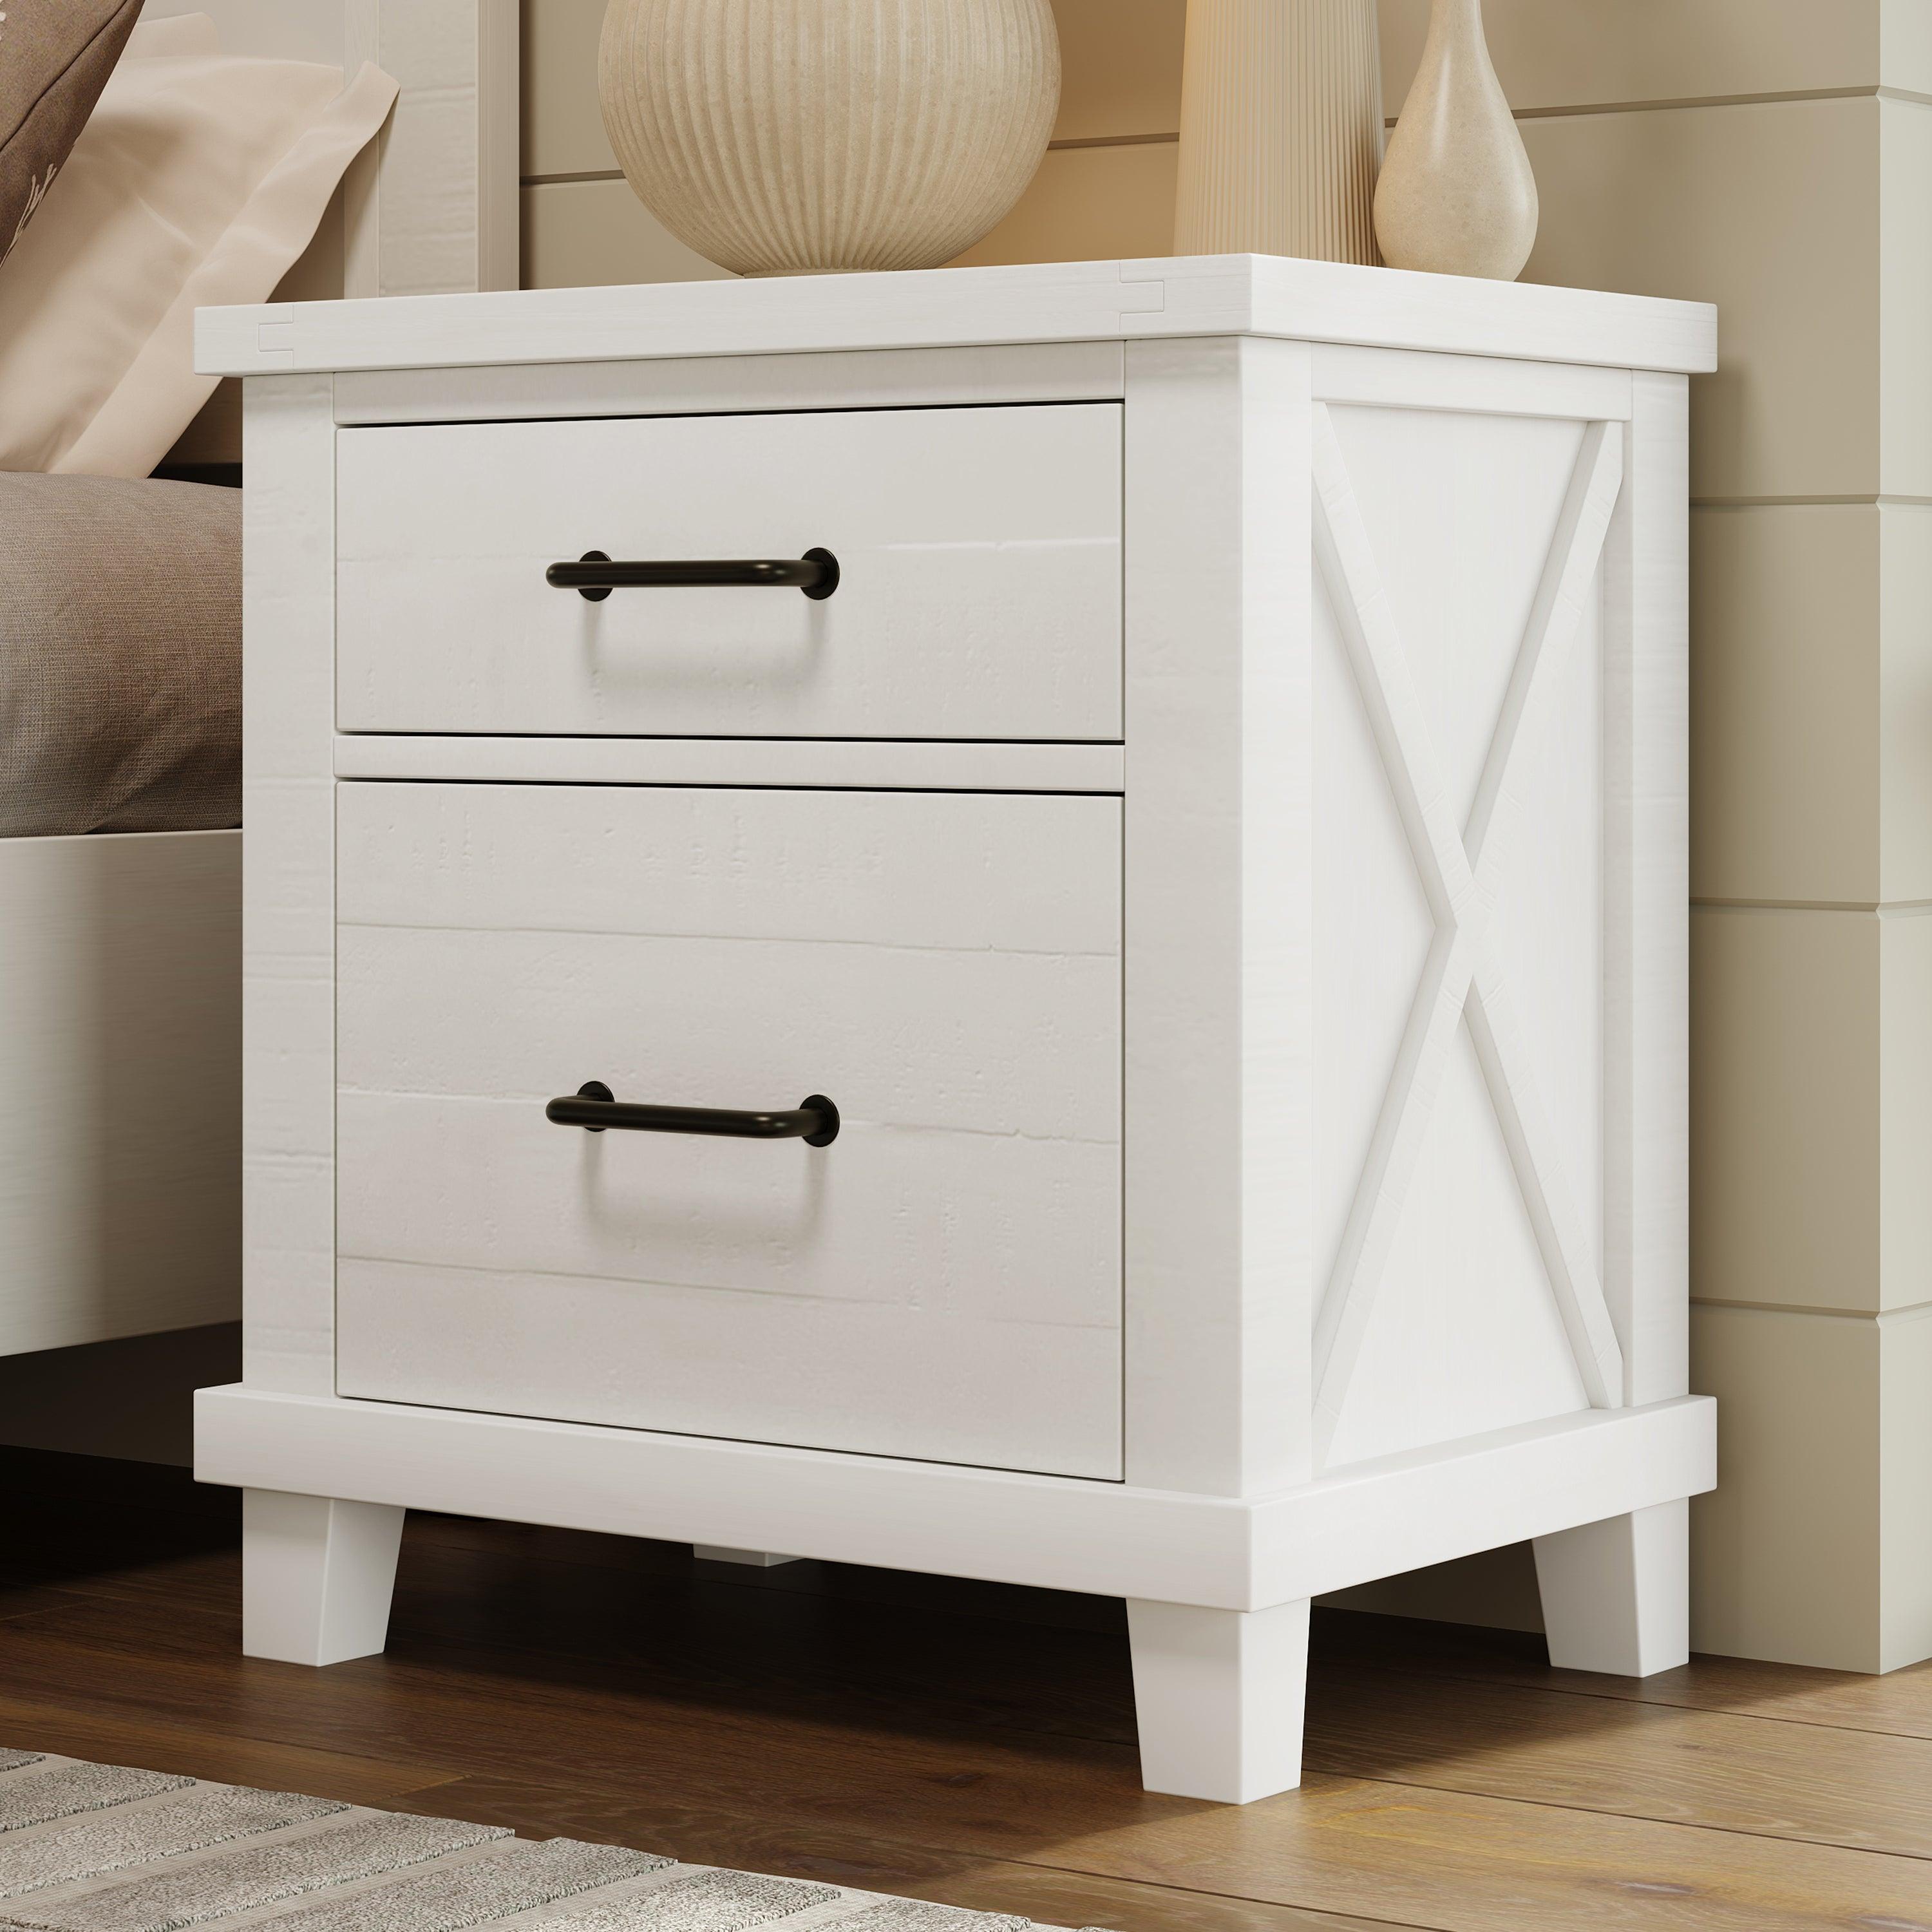 🆓🚛 Rustic Farmhouse Style Solid Pine Wood Whitewash Two-Drawer Nightstand for Bedroom, Living Room, White